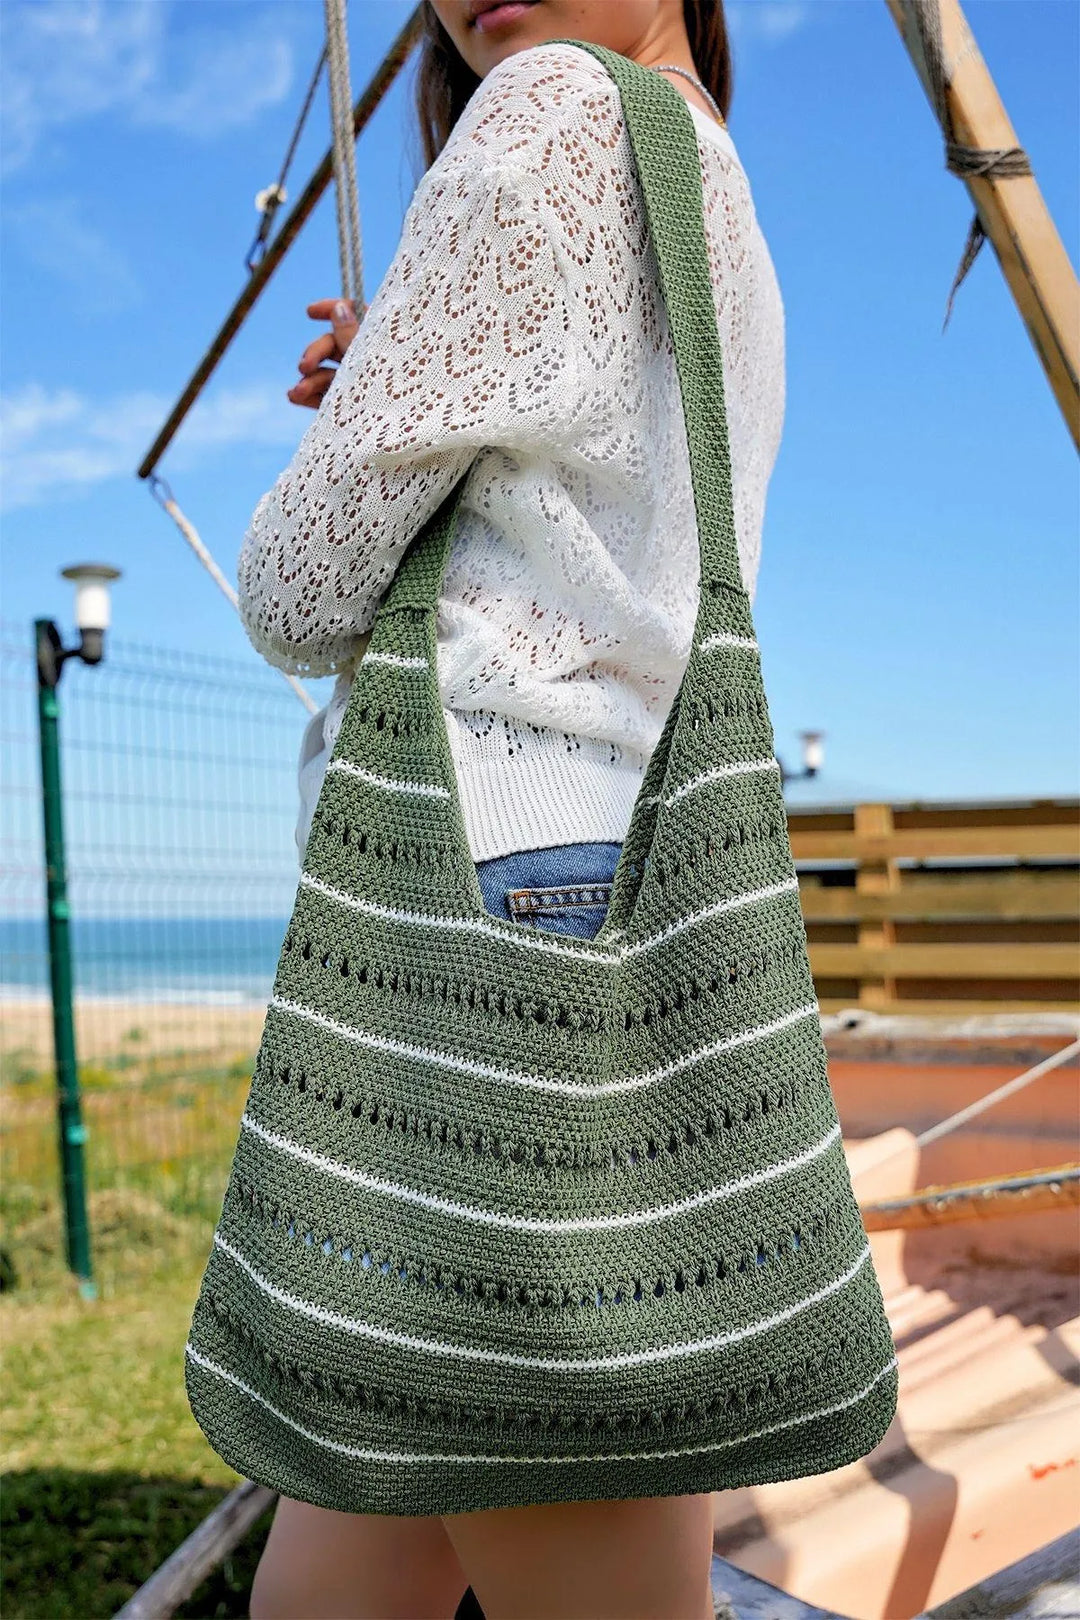 Striped Knitwear Cross Strap Casual Hand&Shoulder And Beach Bag Green White